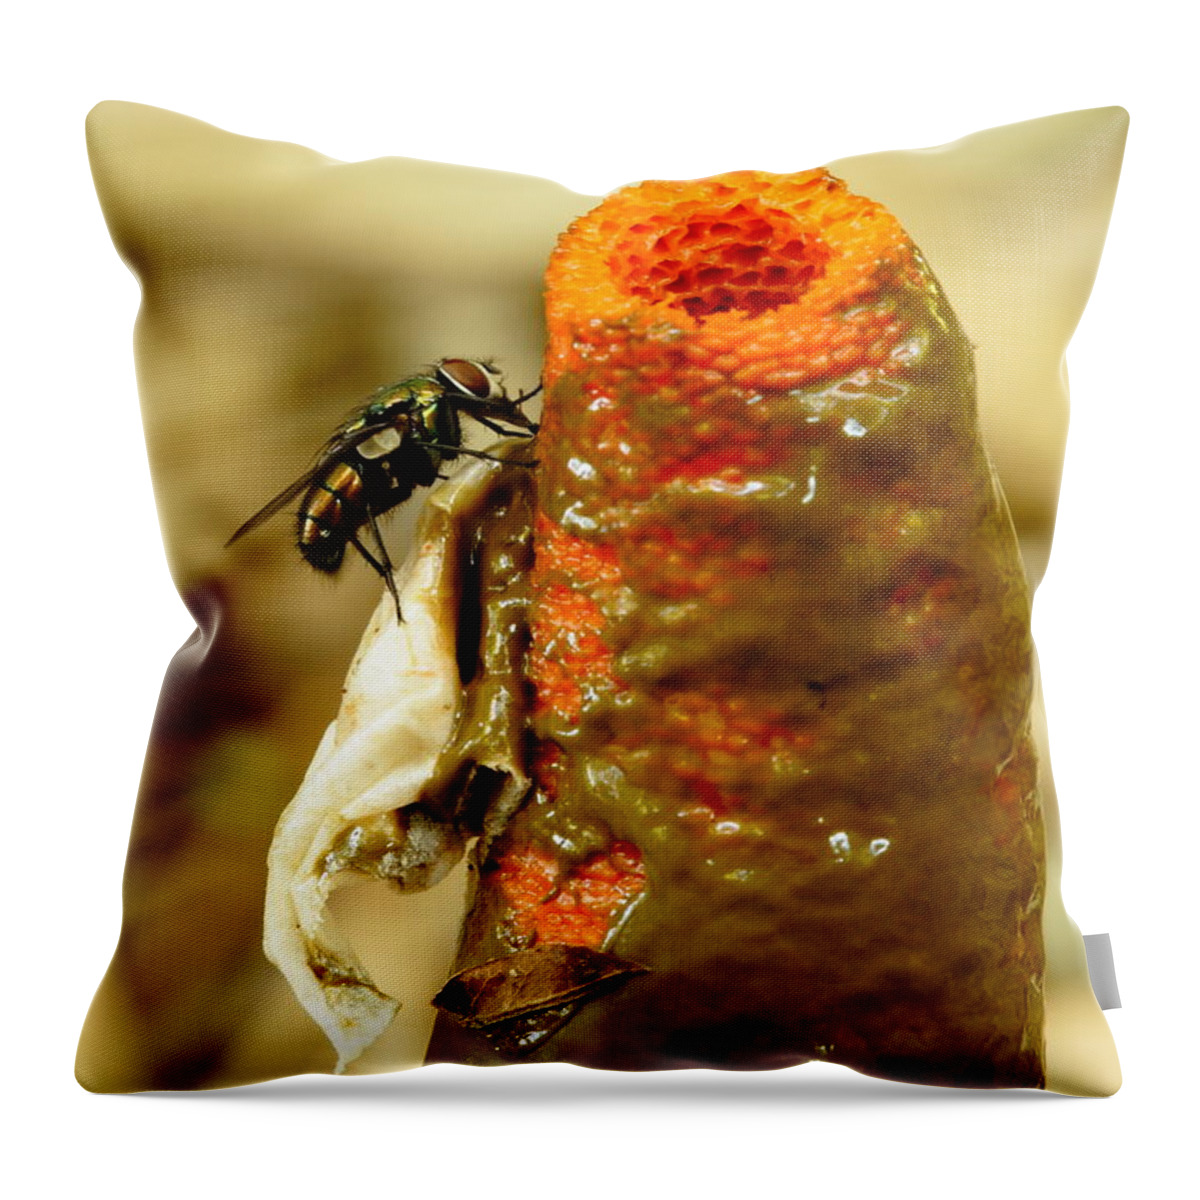 Mutinus Elegans Throw Pillow featuring the photograph Tip Of Stinkhorn Mushroom With Fly by Daniel Reed